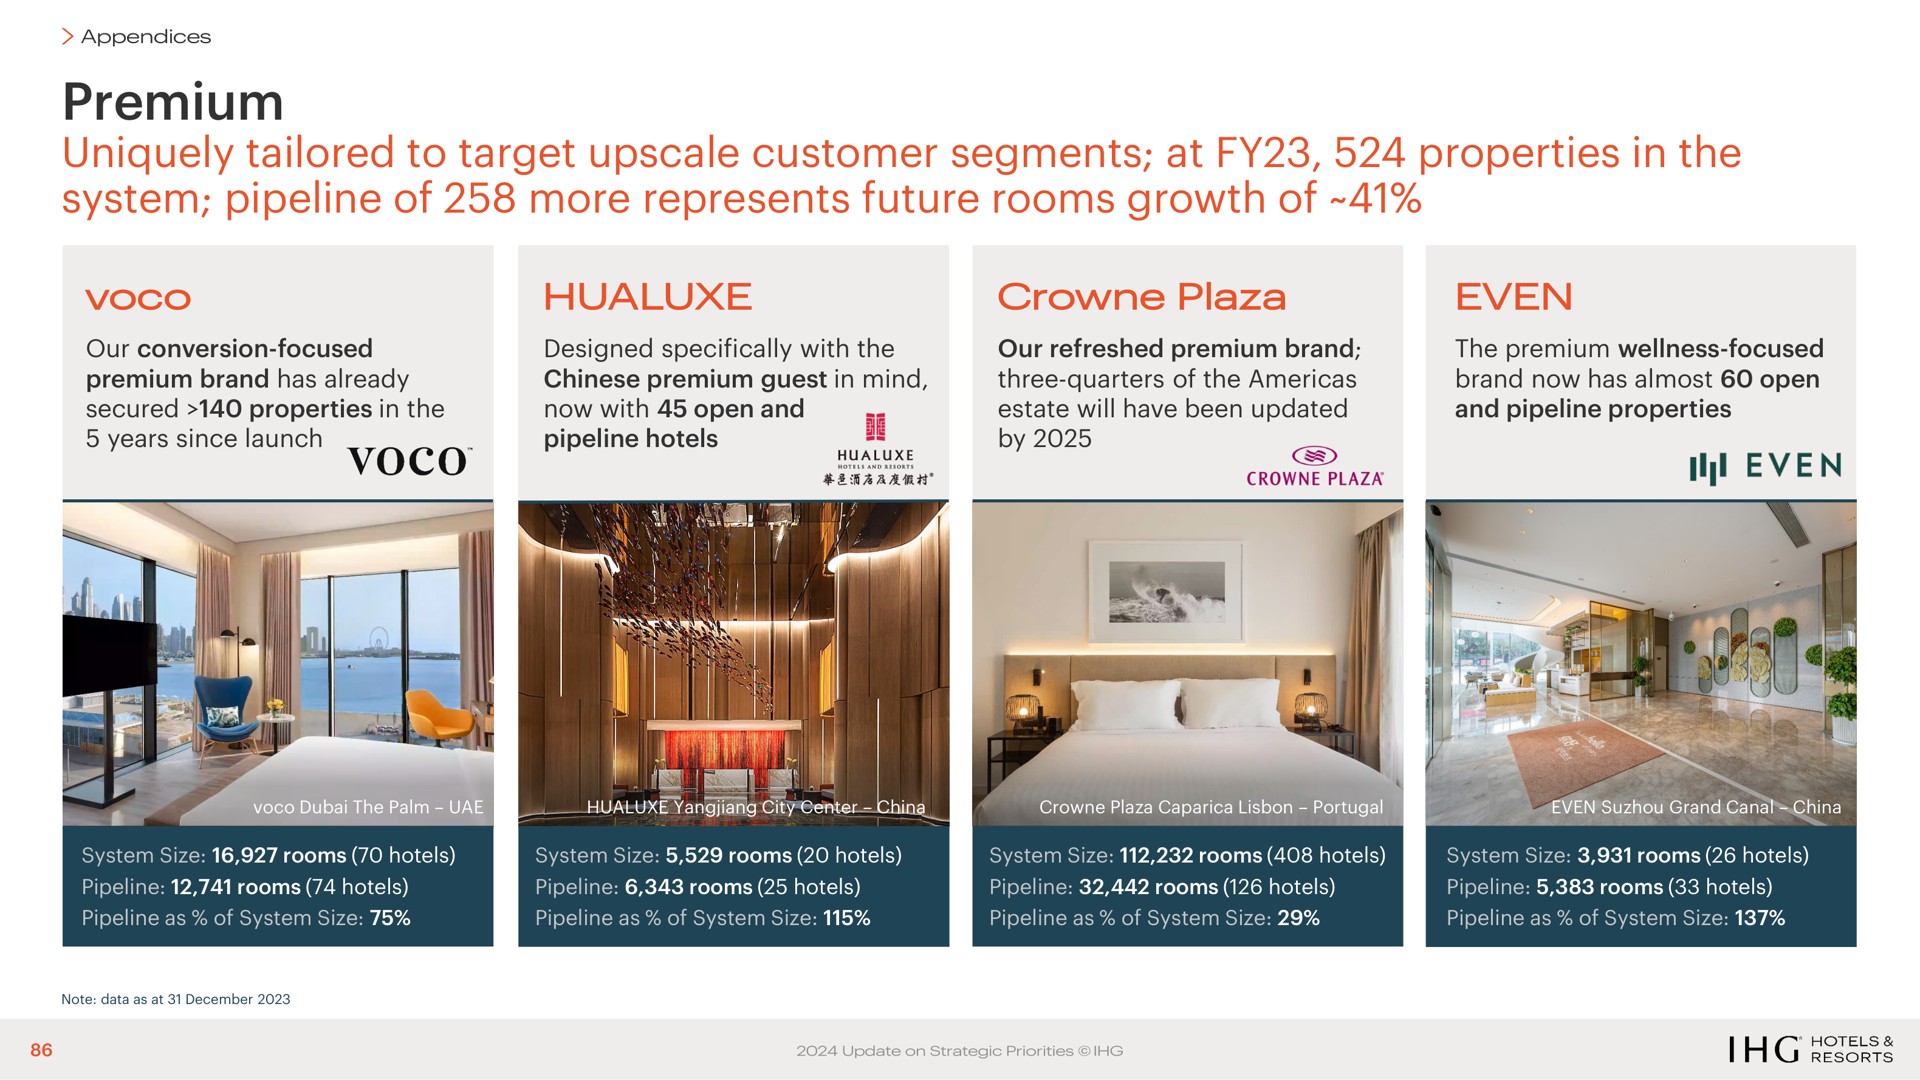 premium uniquely tailored to target upscale customer segments at properties in the system pipeline of more represents future rooms growth of even | IHG Hotels